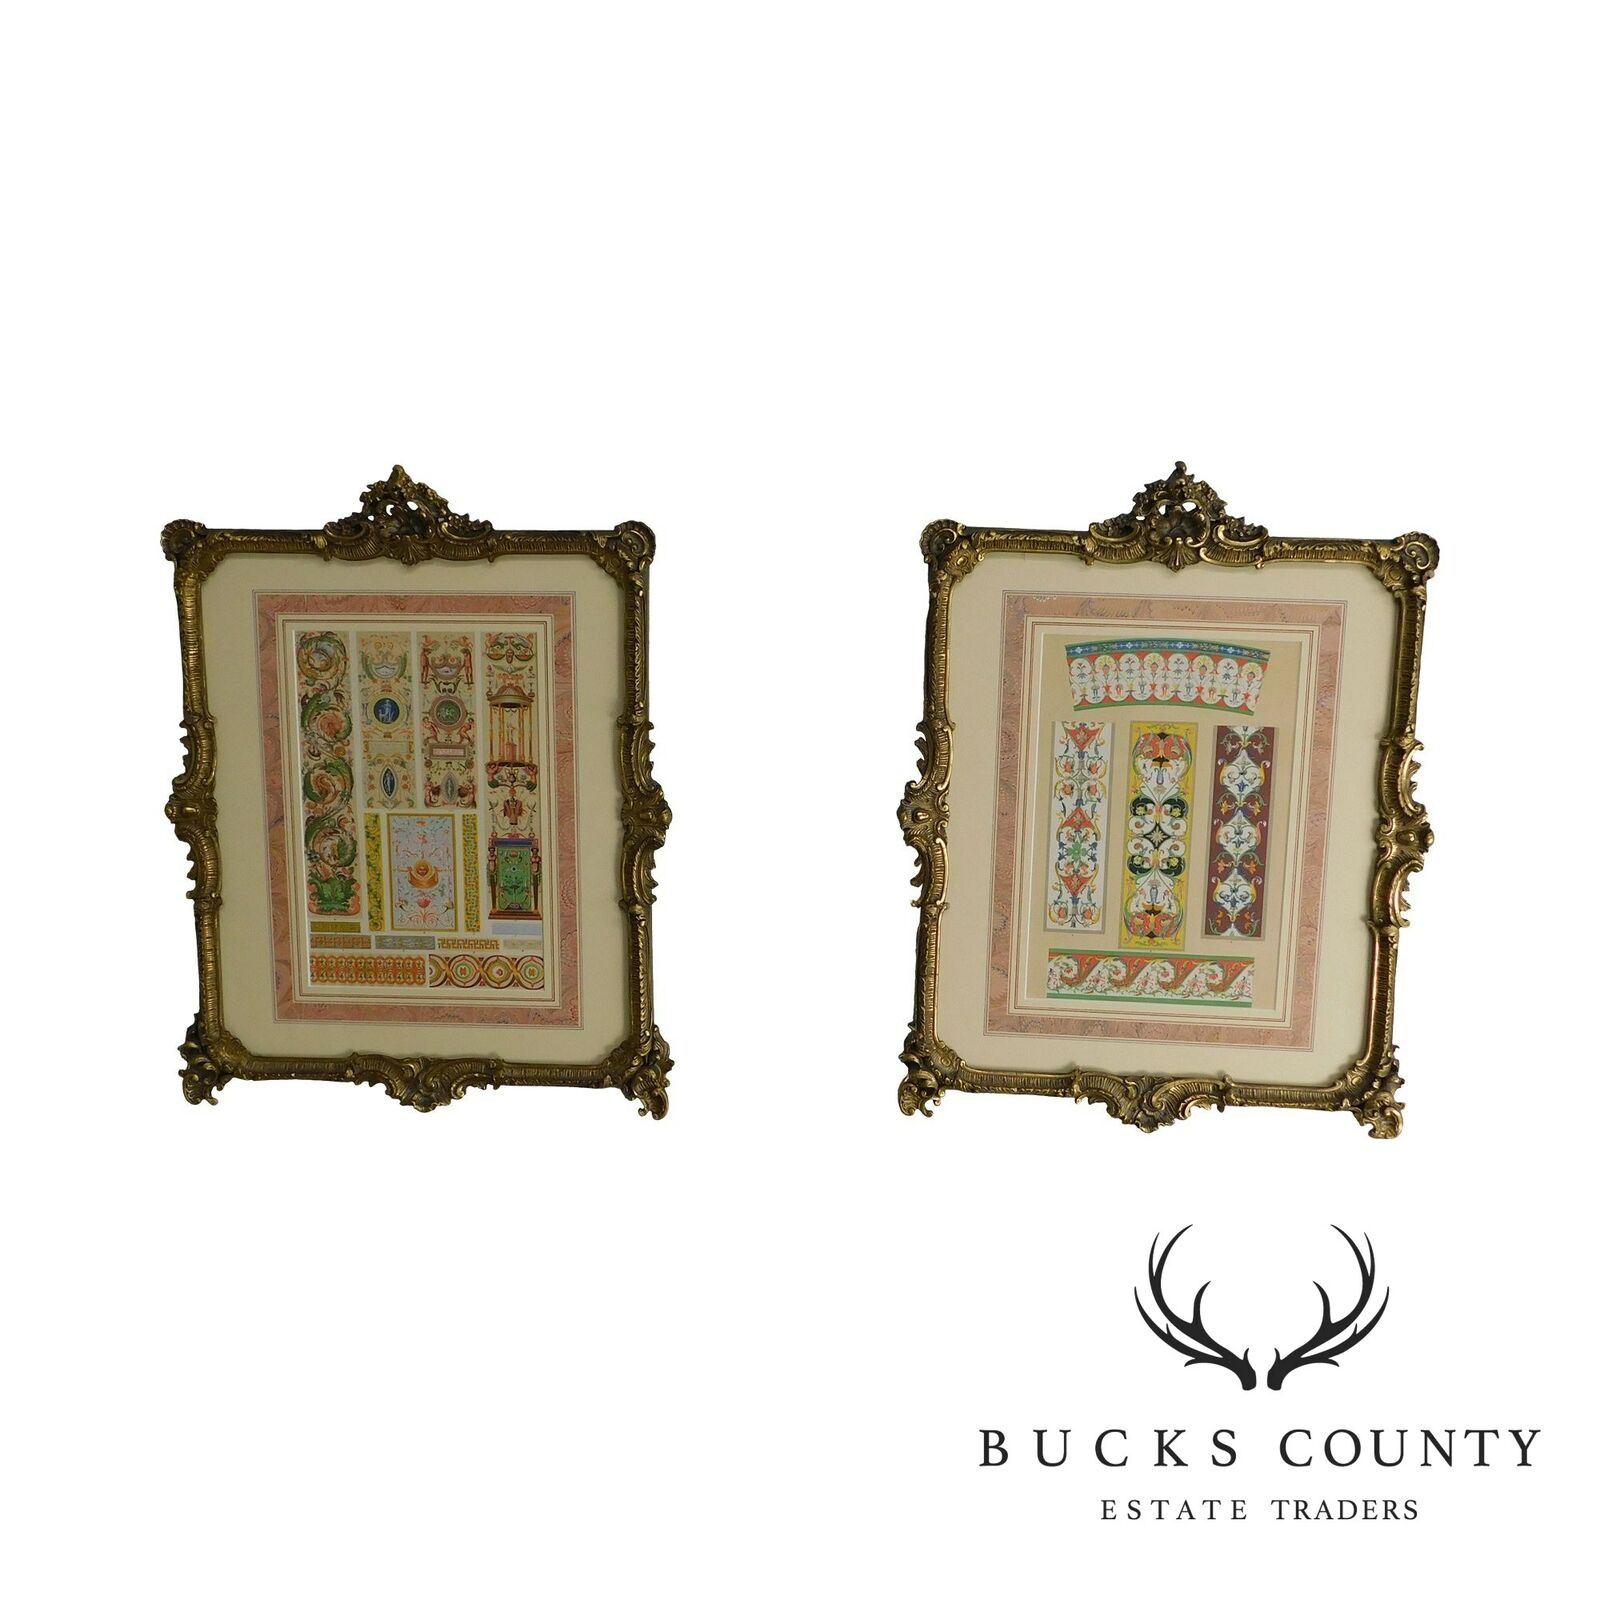 Rococo Gilt Framed Pair of Prints Showing Samples of Decorative Wallpaper Border